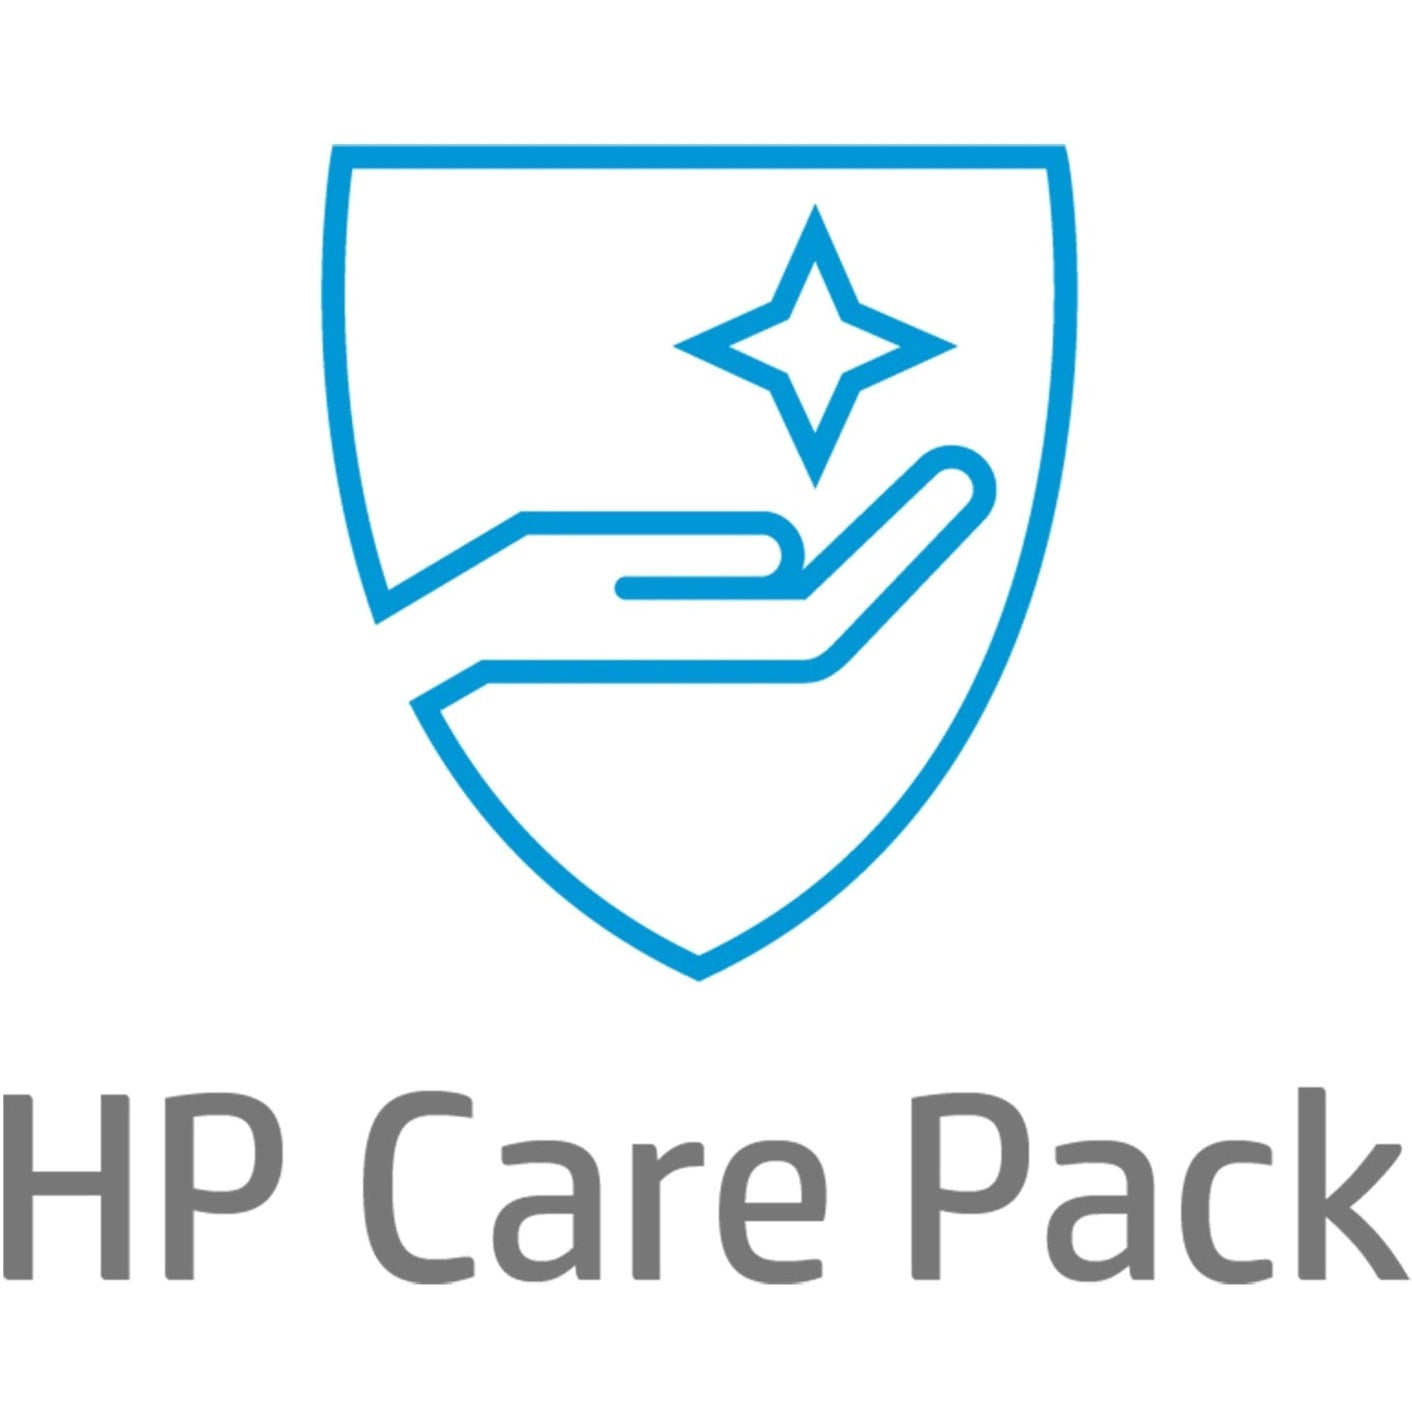 HP Care Pack Hardware Support with Defective Media Retention - 3 Year - Warranty (U9MZ3E)